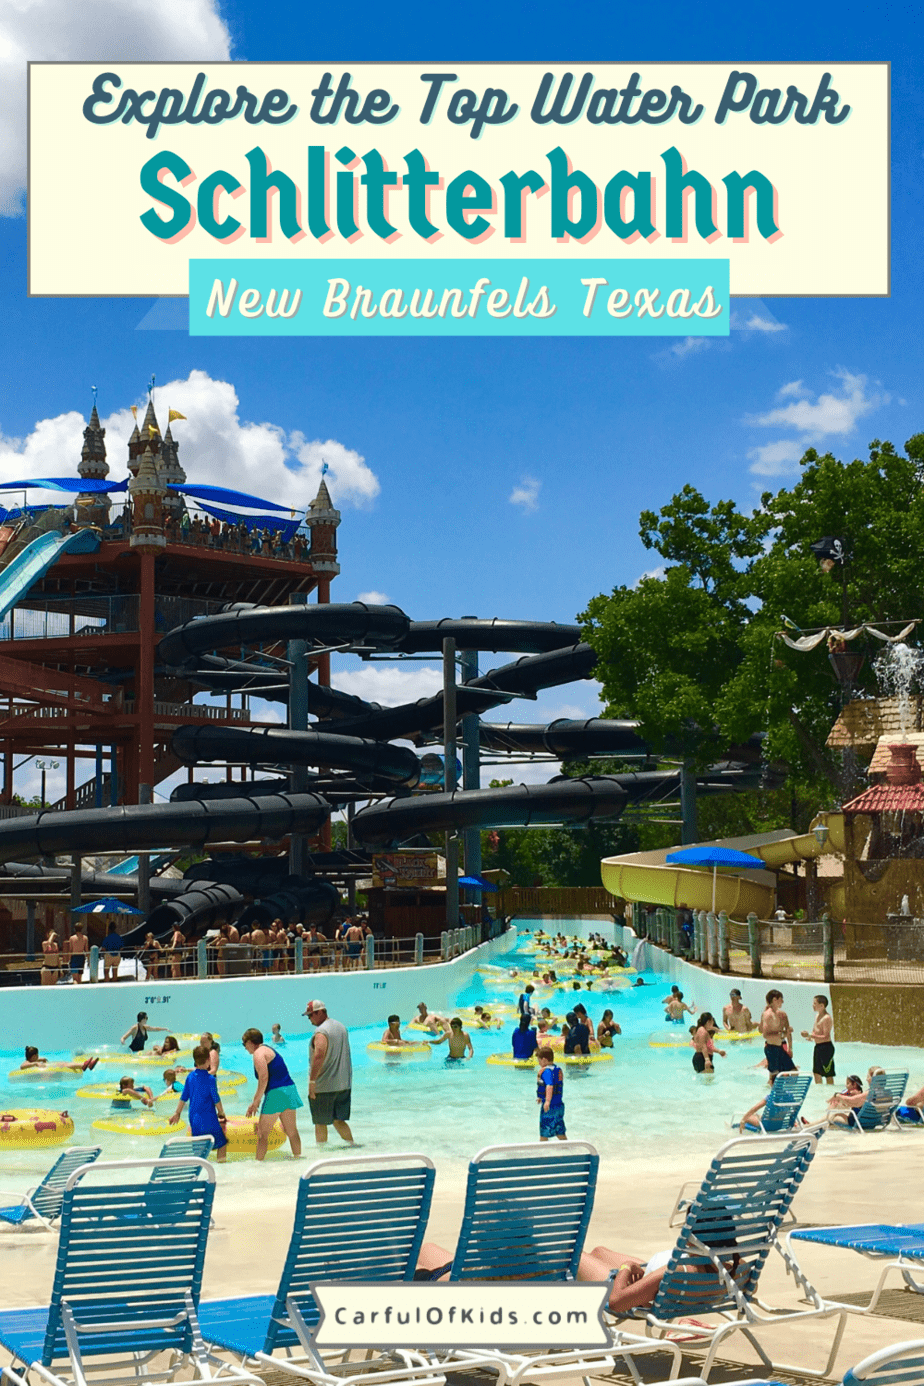 Known as the top water park in the U.S. for over 20 years, it's actually two water parks. One is an natural water park with chutes and river rides. The other waterpark is all about the slides and rides. See if Shlitterbahn Water Park in New Braunfels Texas needs to be on your summer to do list. Best Water Park in the U.S. | Top Water Park in Texas #Schlitterbahn #Texas